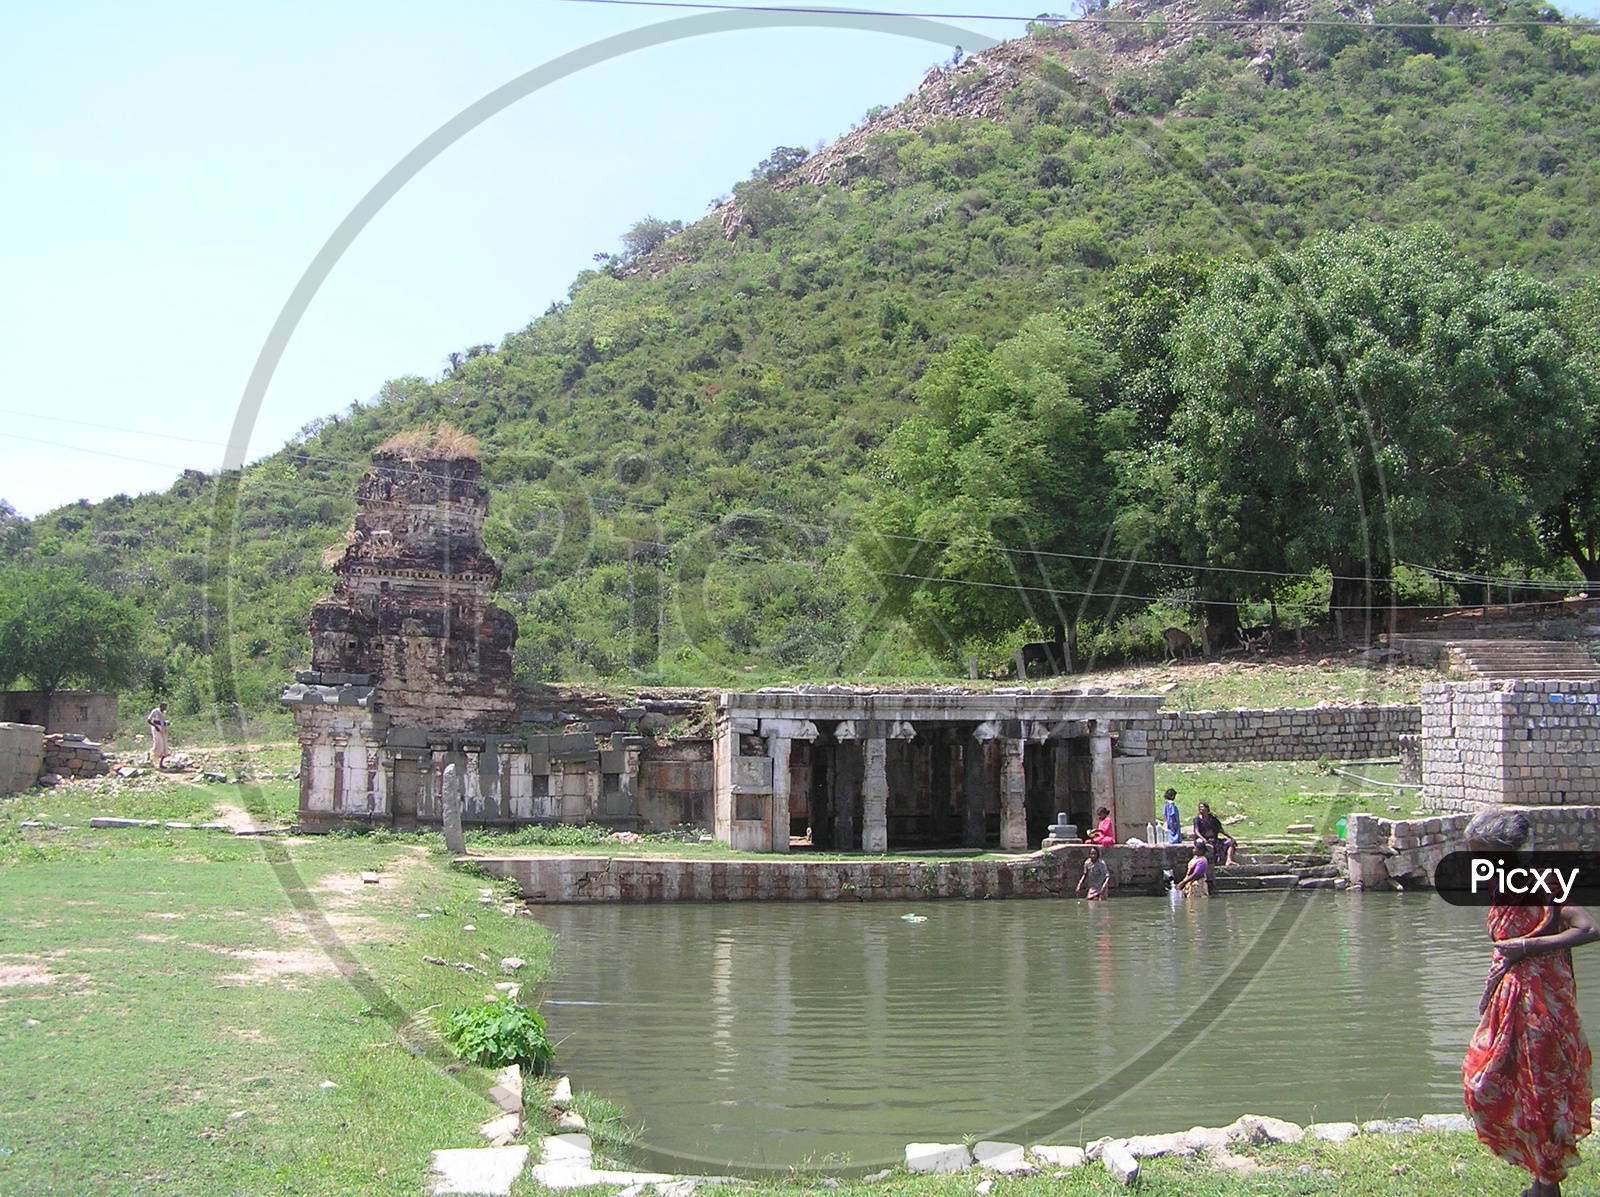 Local People Collecting Water From Temple Ponds